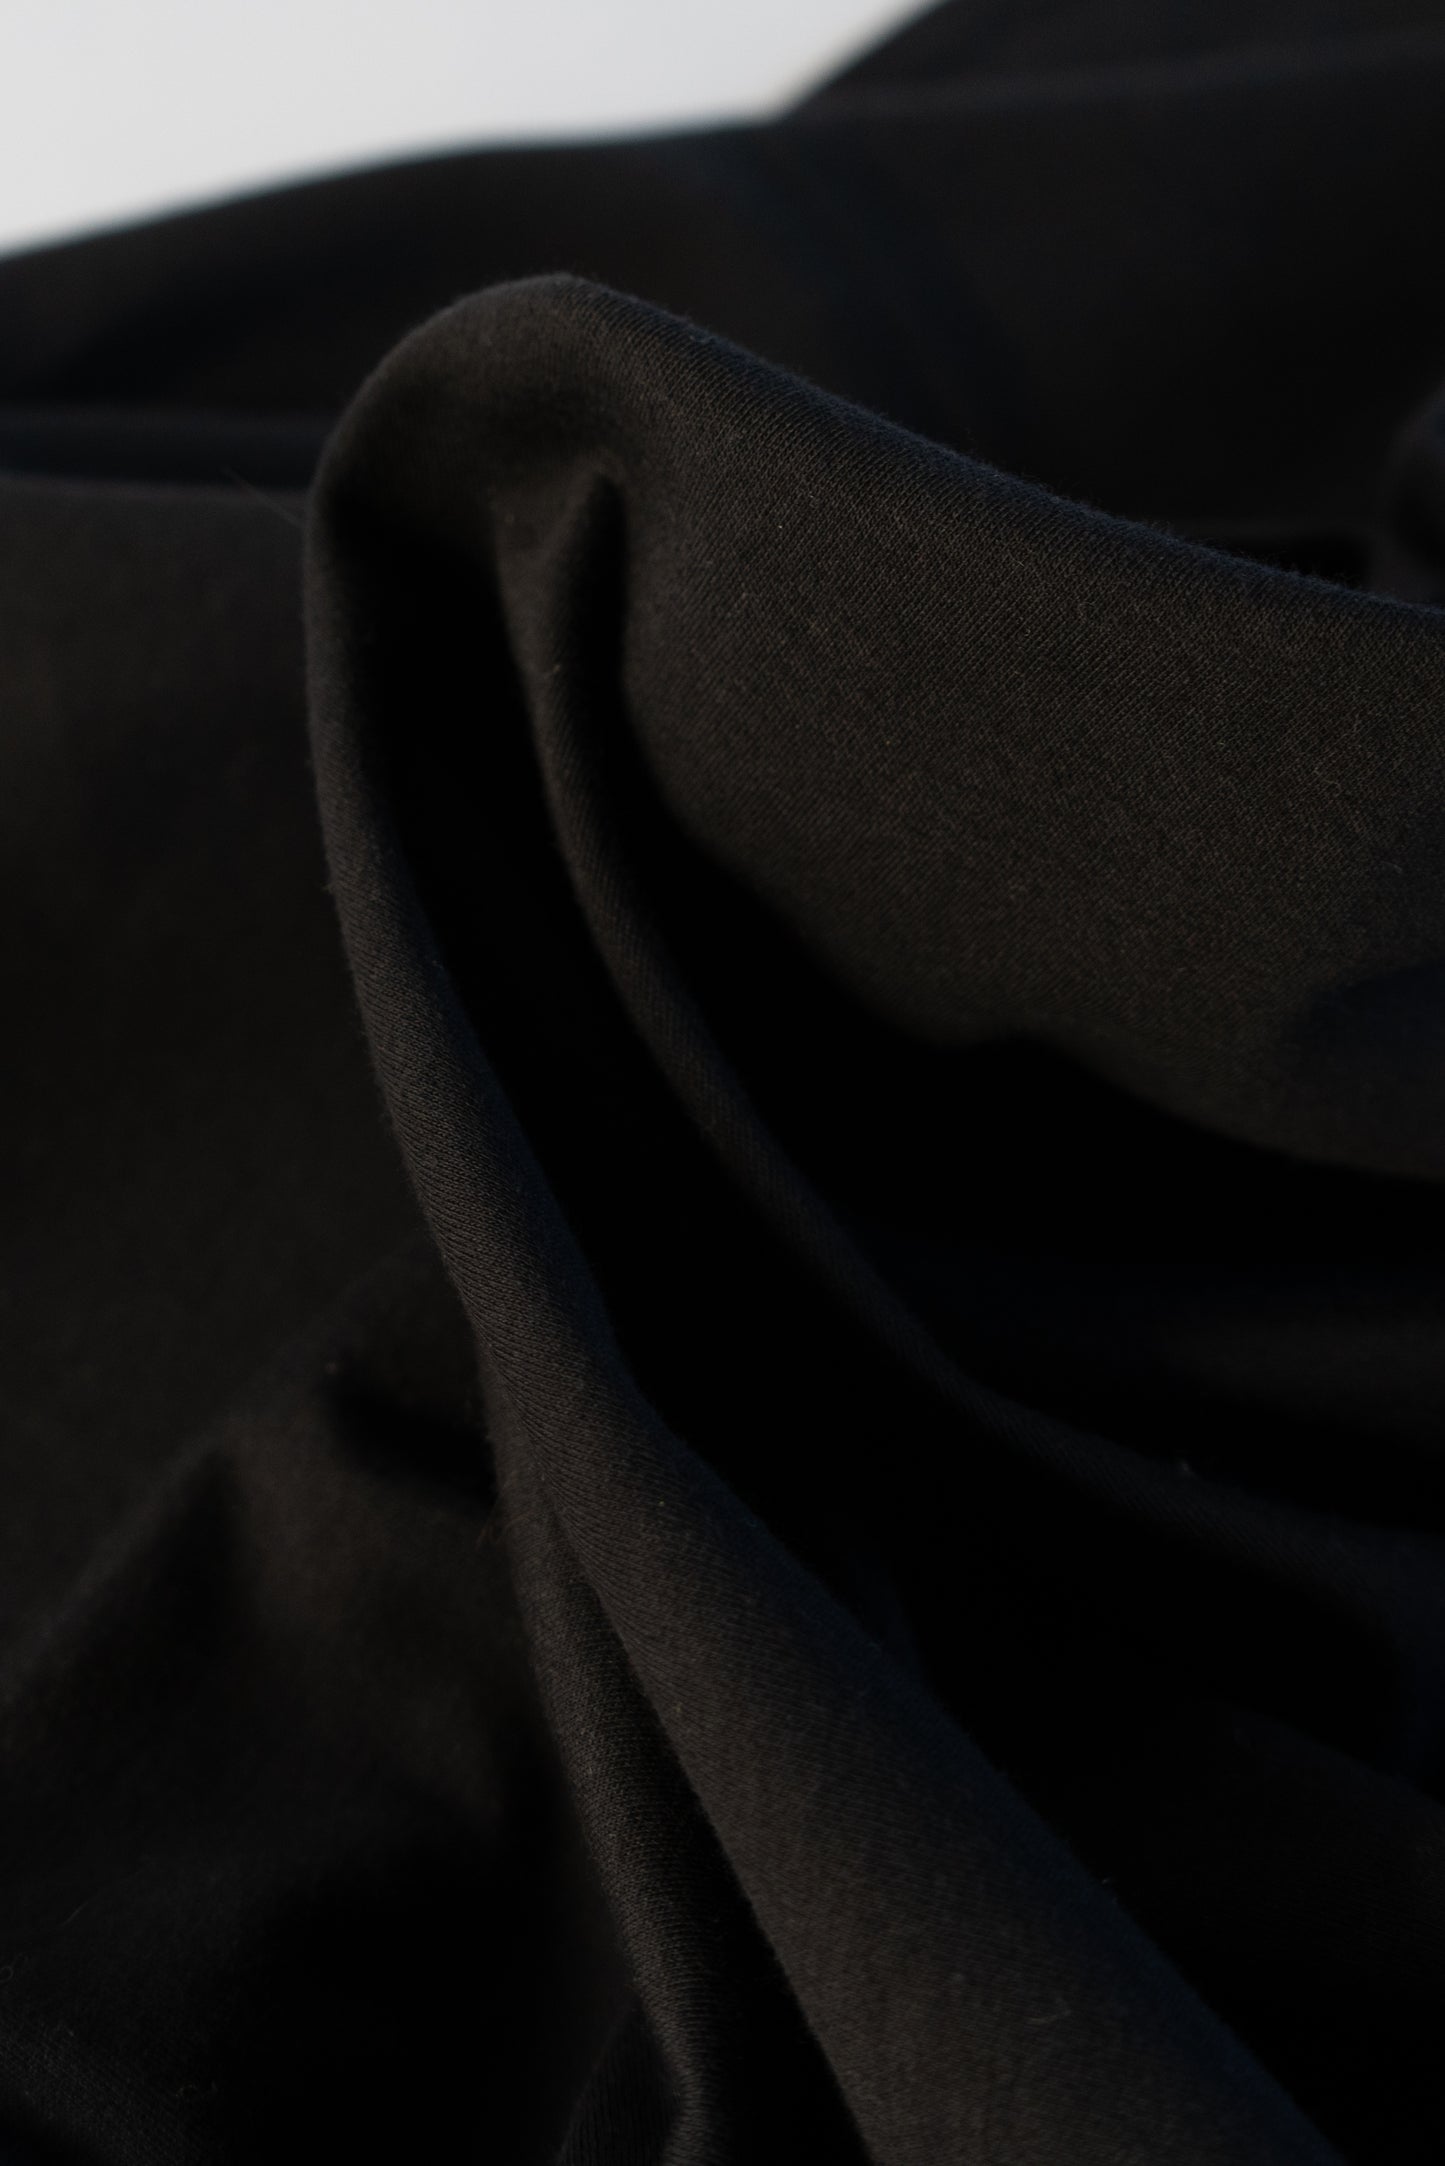 Close up of black jersey fabric for mens shirt